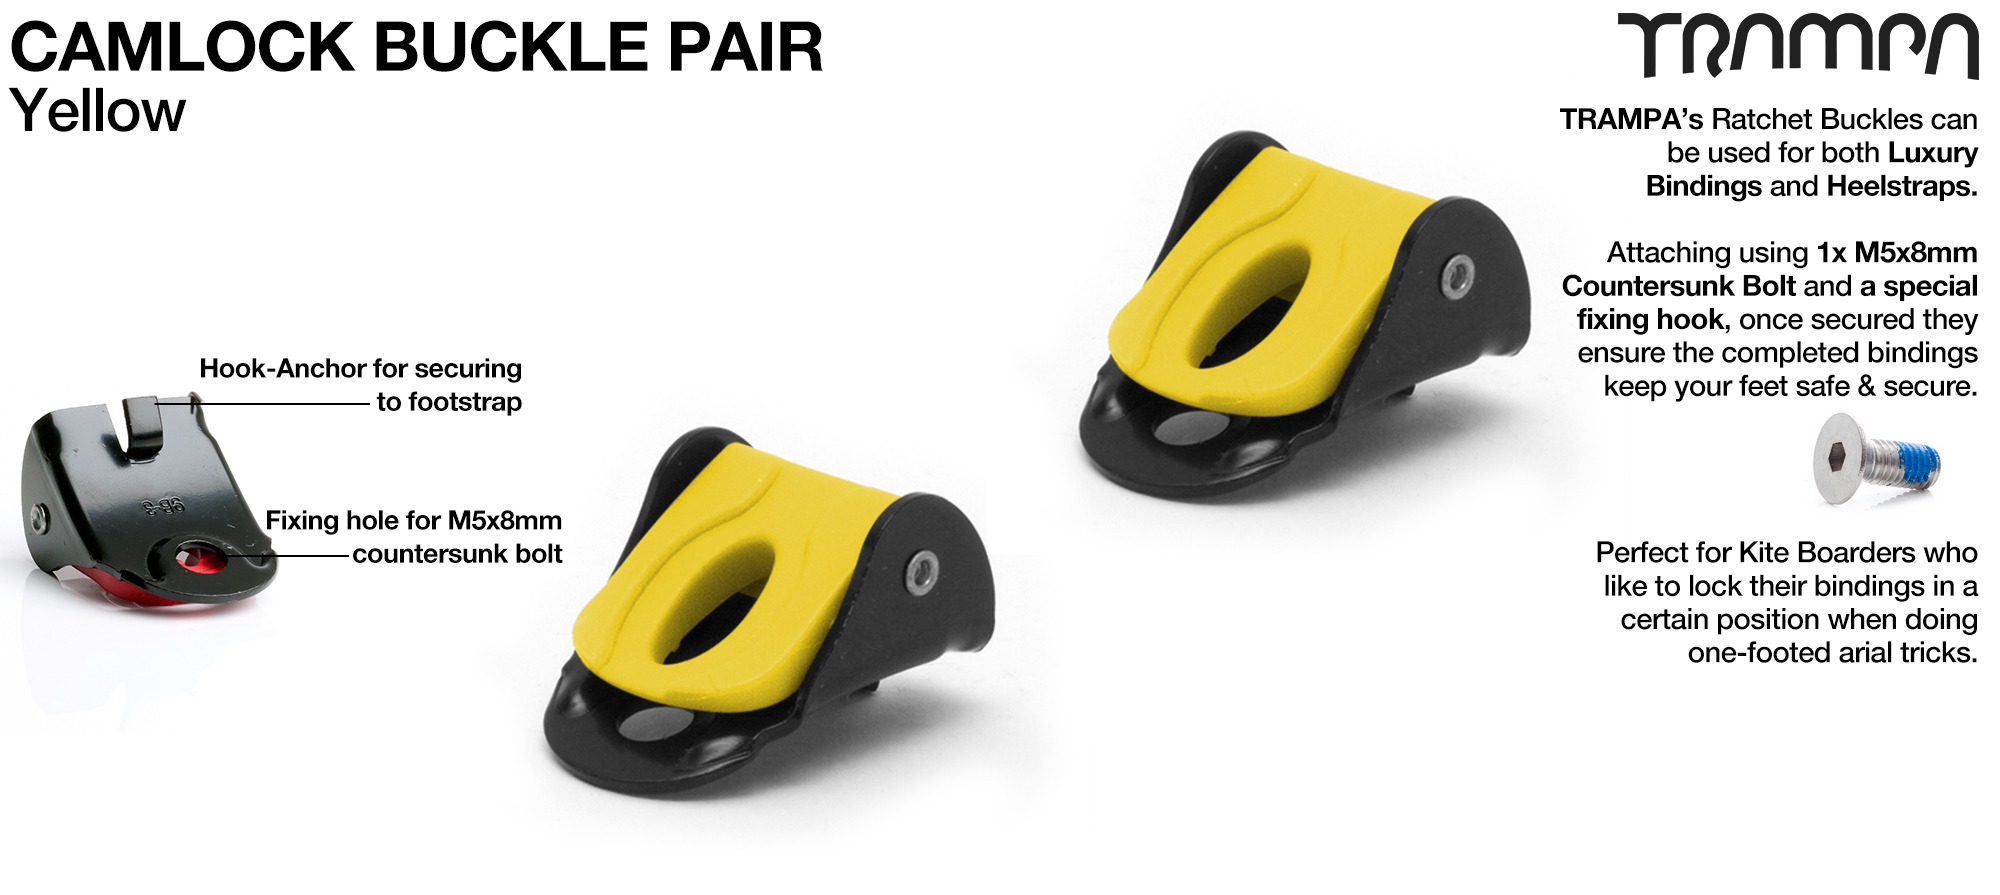 Camlock buckles for foot and heel strap Bindings - YELLOW x 2